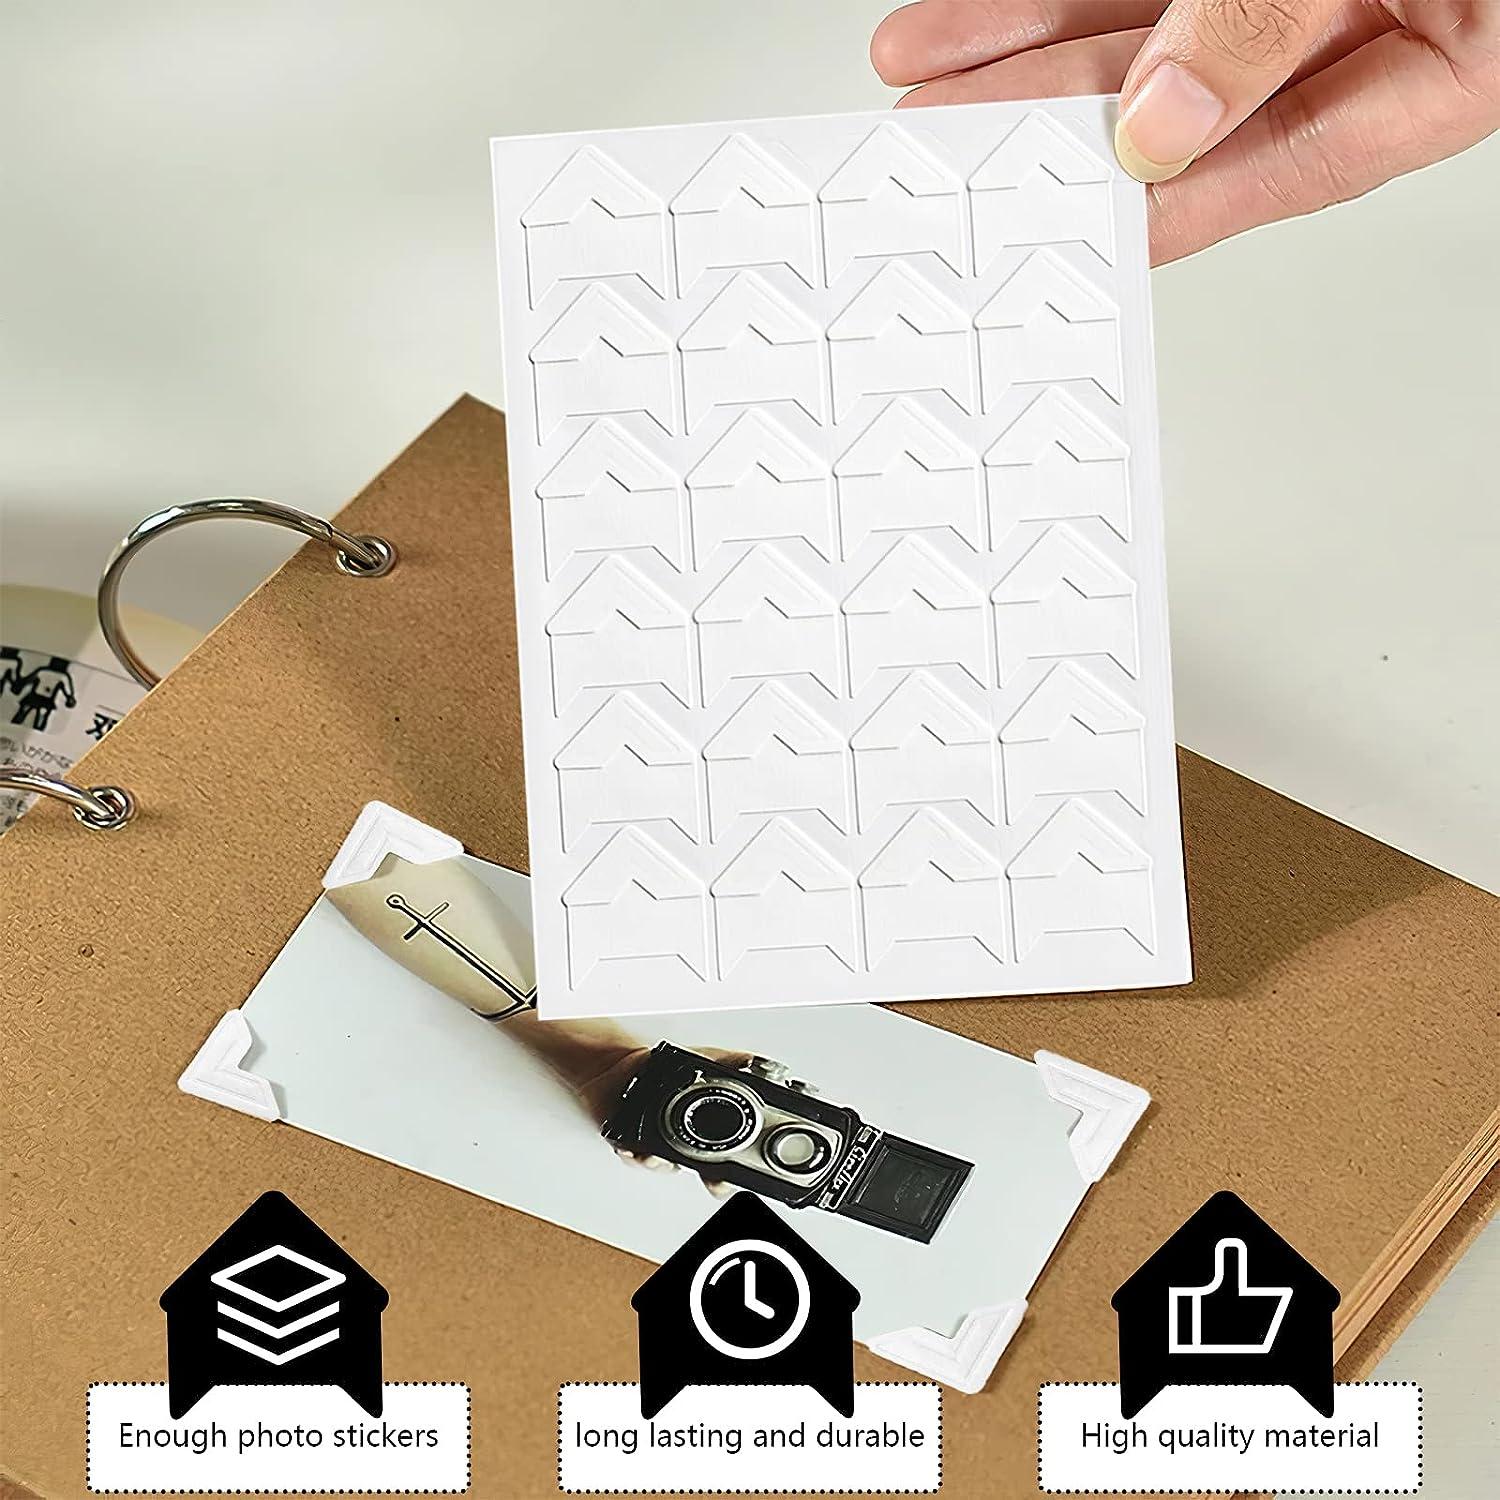 STOBOK 10 Sheets Photo Corner Stickers Picture Mounting Corners Self  Adhesive Paper Photo Holder Arrow Embossed for DIY Album Scrapbook Dairy  Electronics